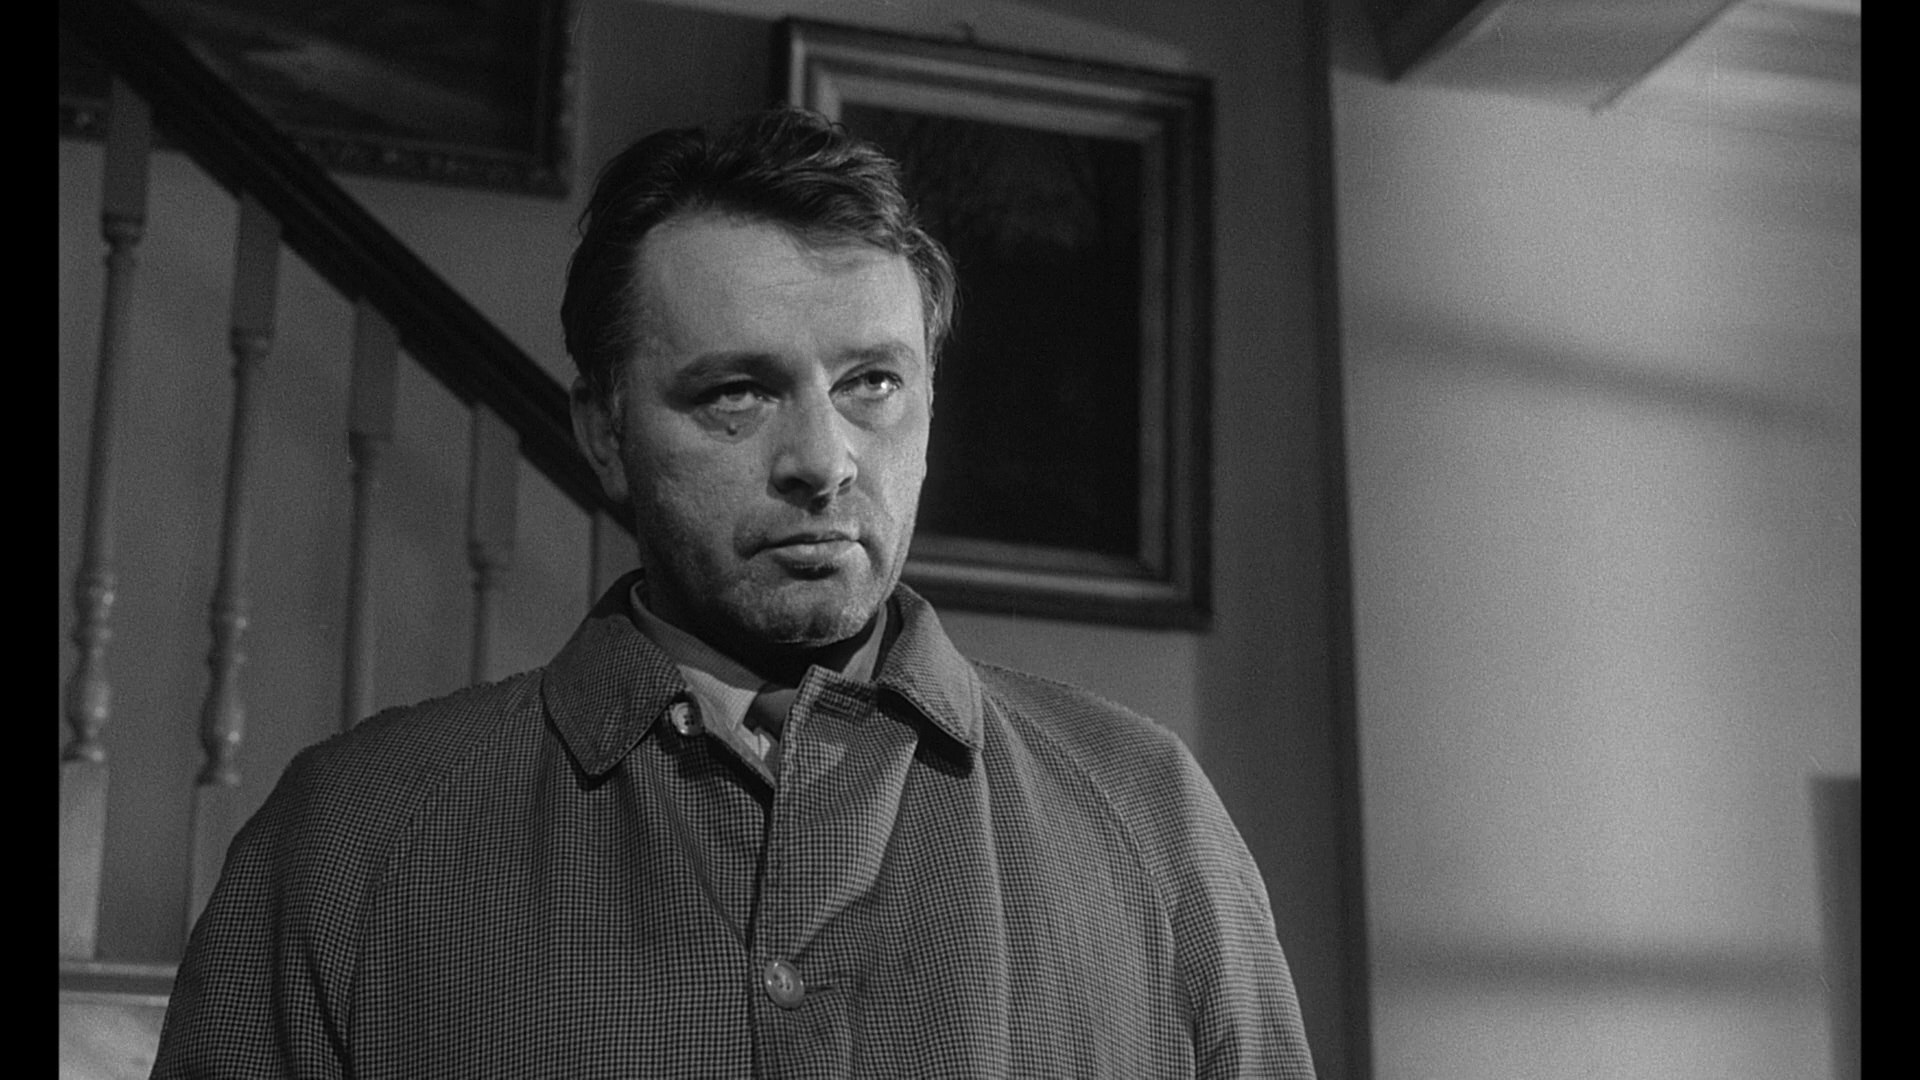 The Spy Who Came in from the Cold, dir. MARTIN RITT